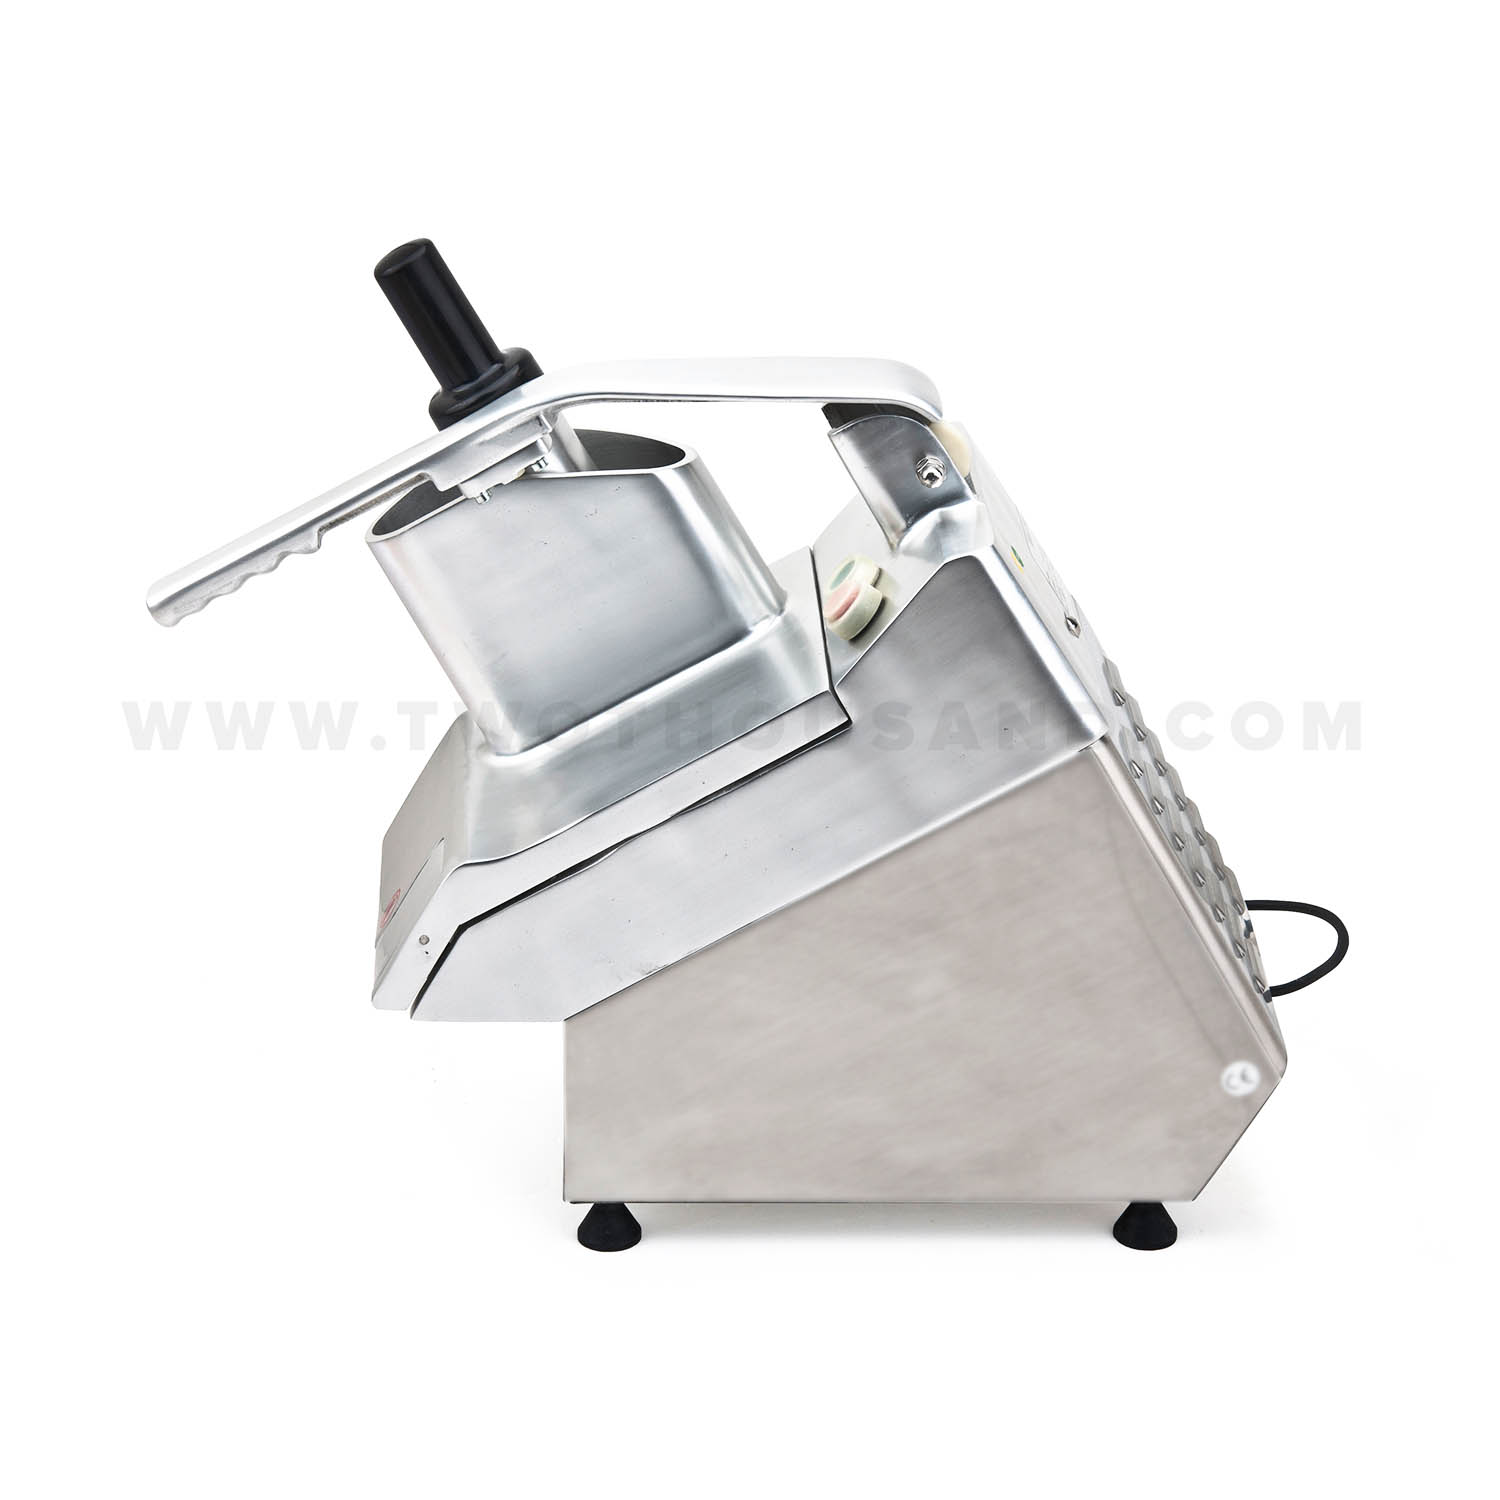 Commercial Vegetable Dicing Machine Manufacturer